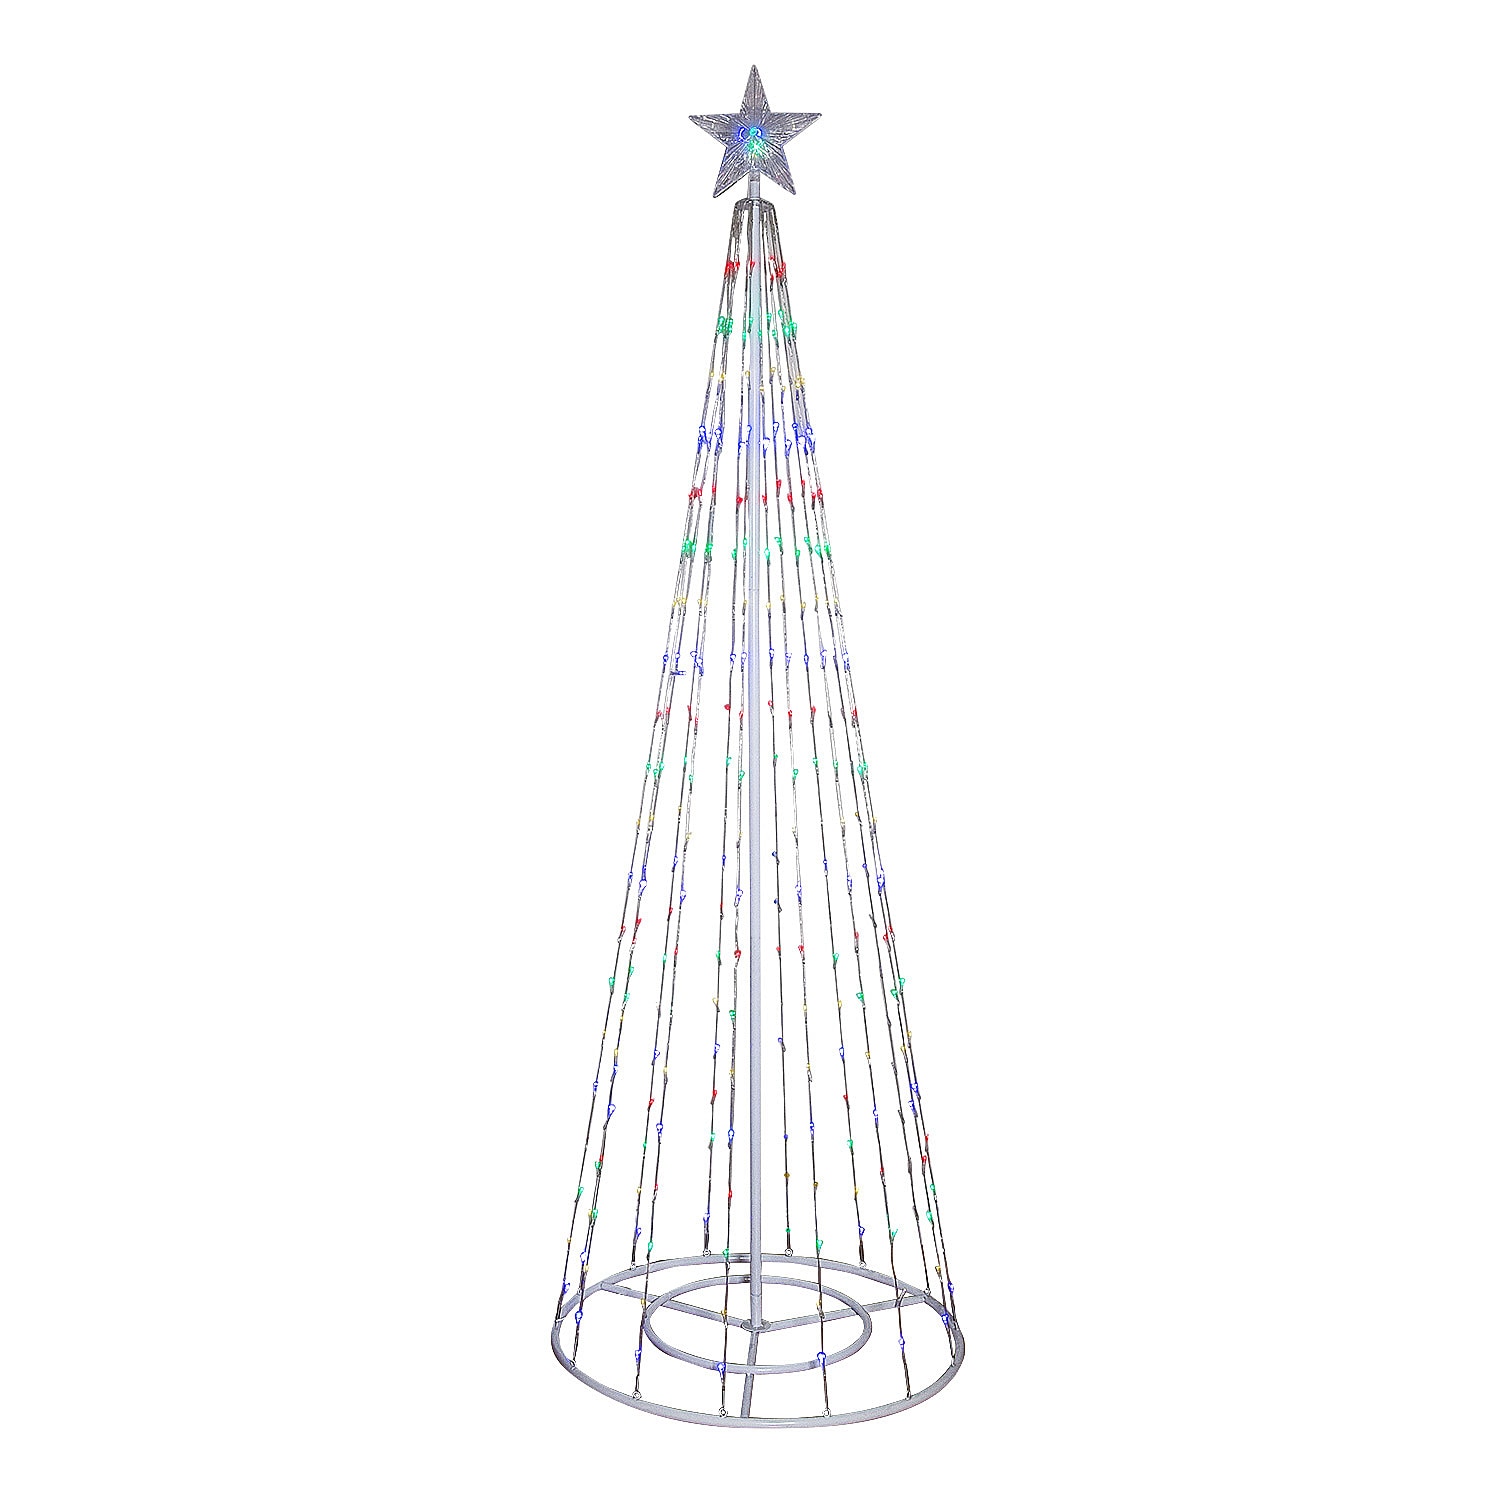 86 Foot Tall Holiday Decorations at Lowes.com